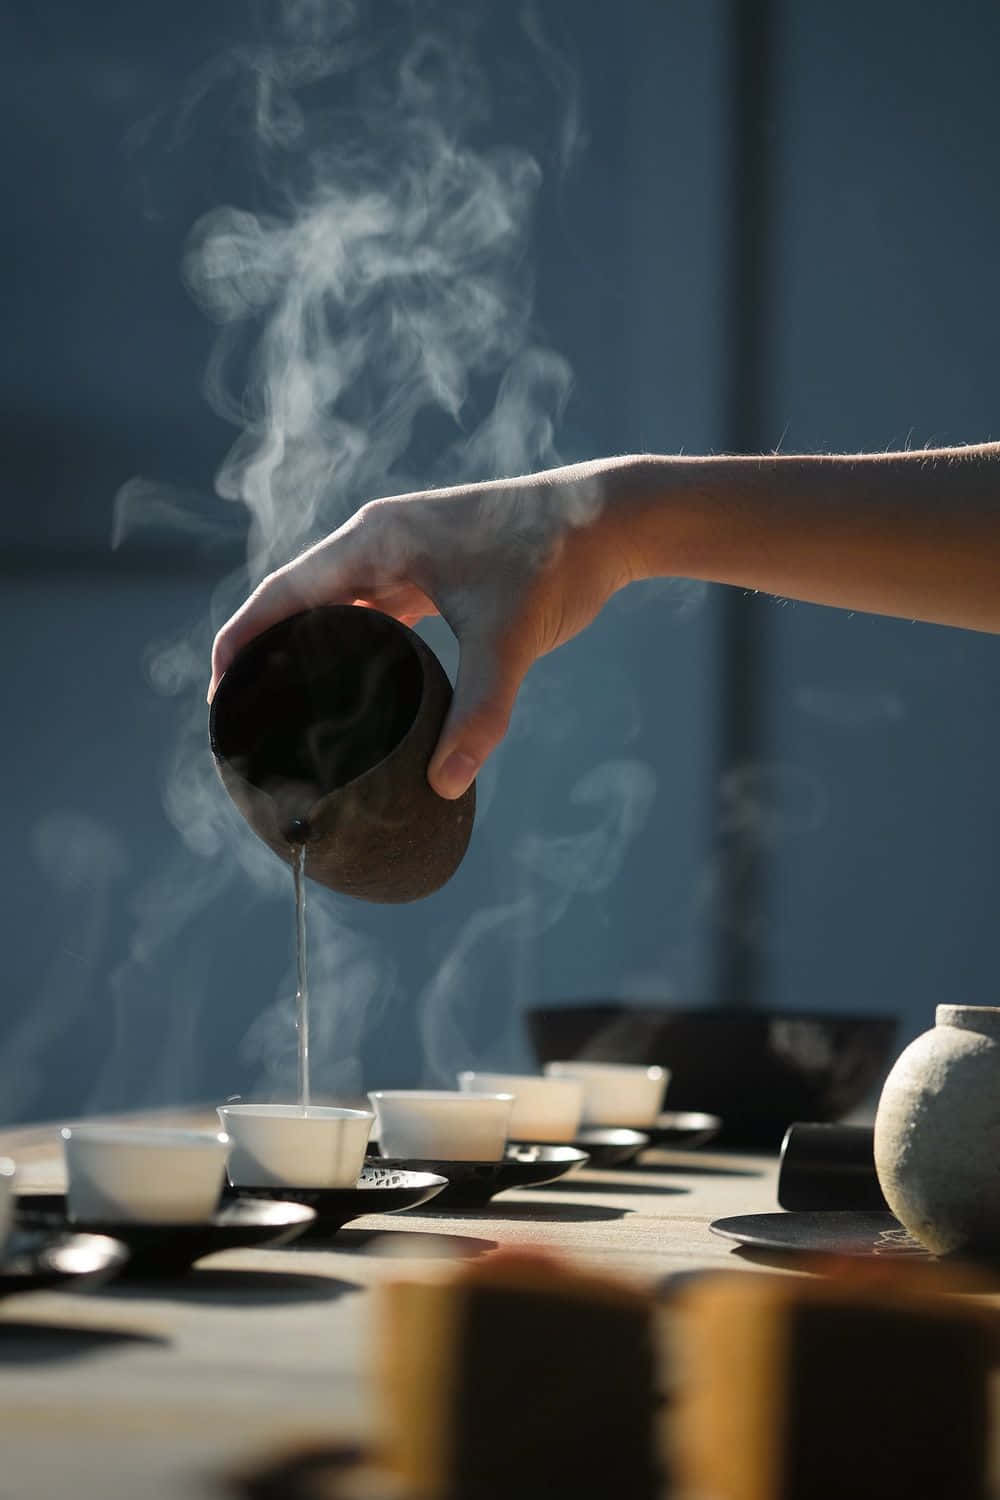 A Person Pouring Tea Into Cups On A Table